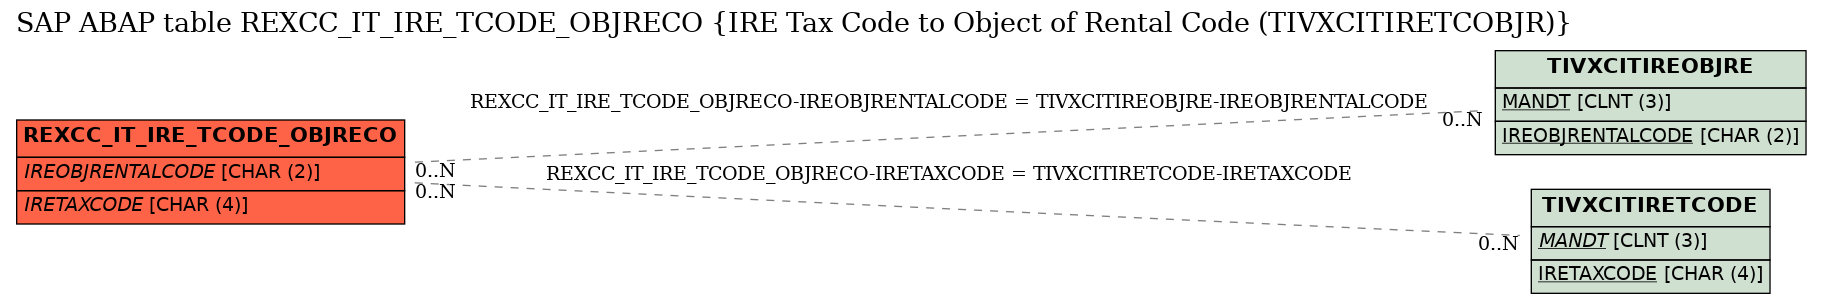 E-R Diagram for table REXCC_IT_IRE_TCODE_OBJRECO (IRE Tax Code to Object of Rental Code (TIVXCITIRETCOBJR))